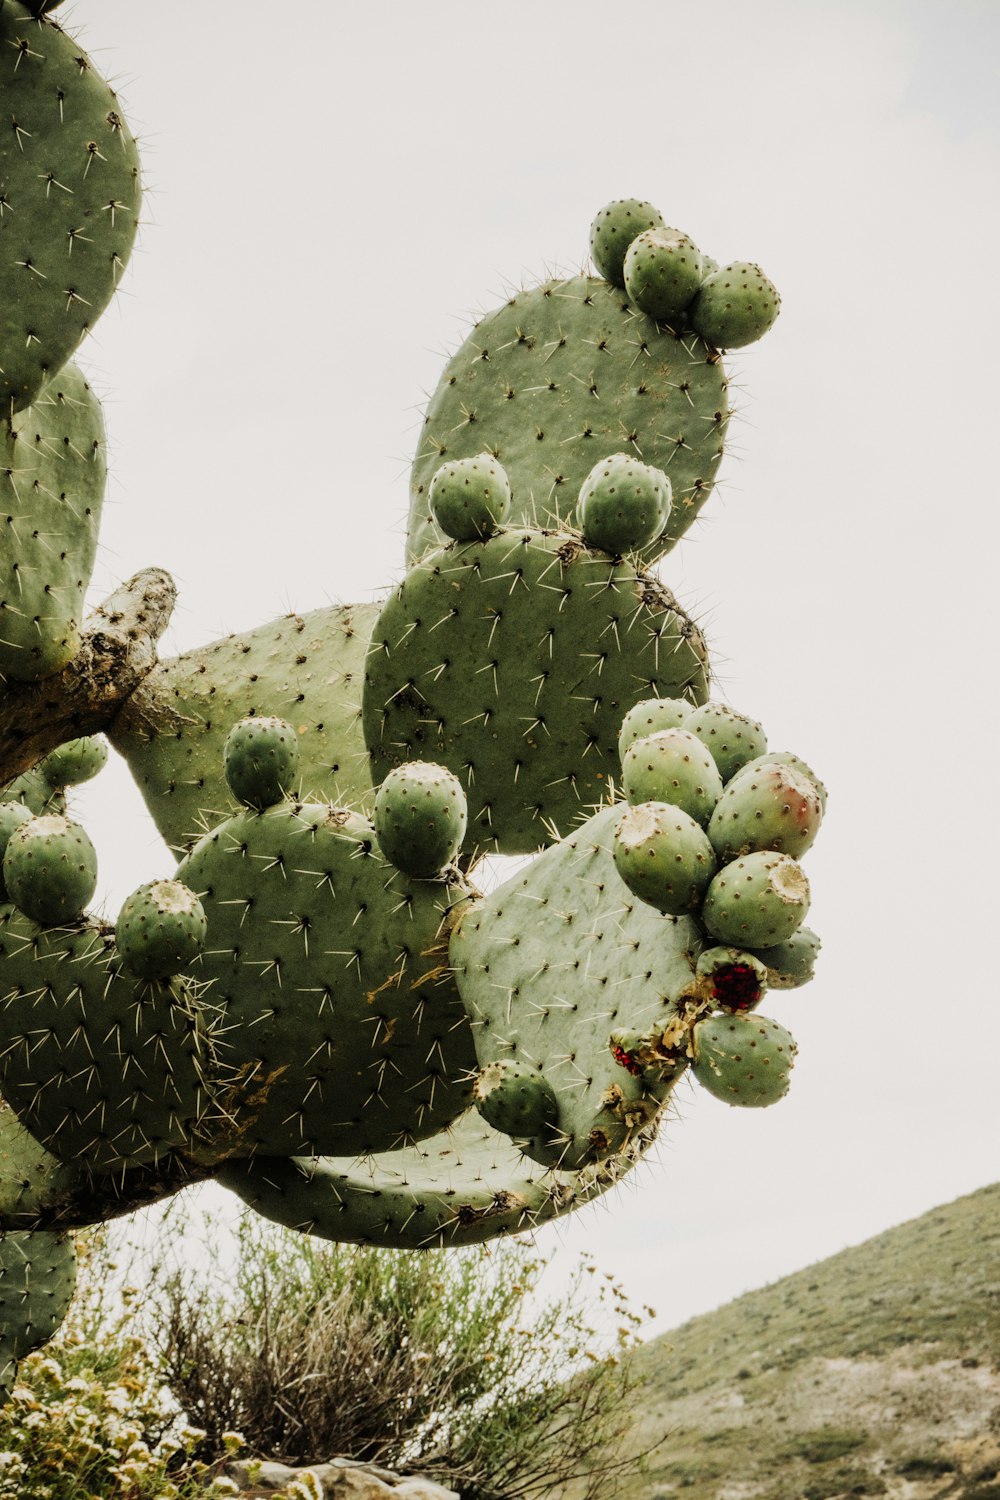 a large cactus with many small green leaves